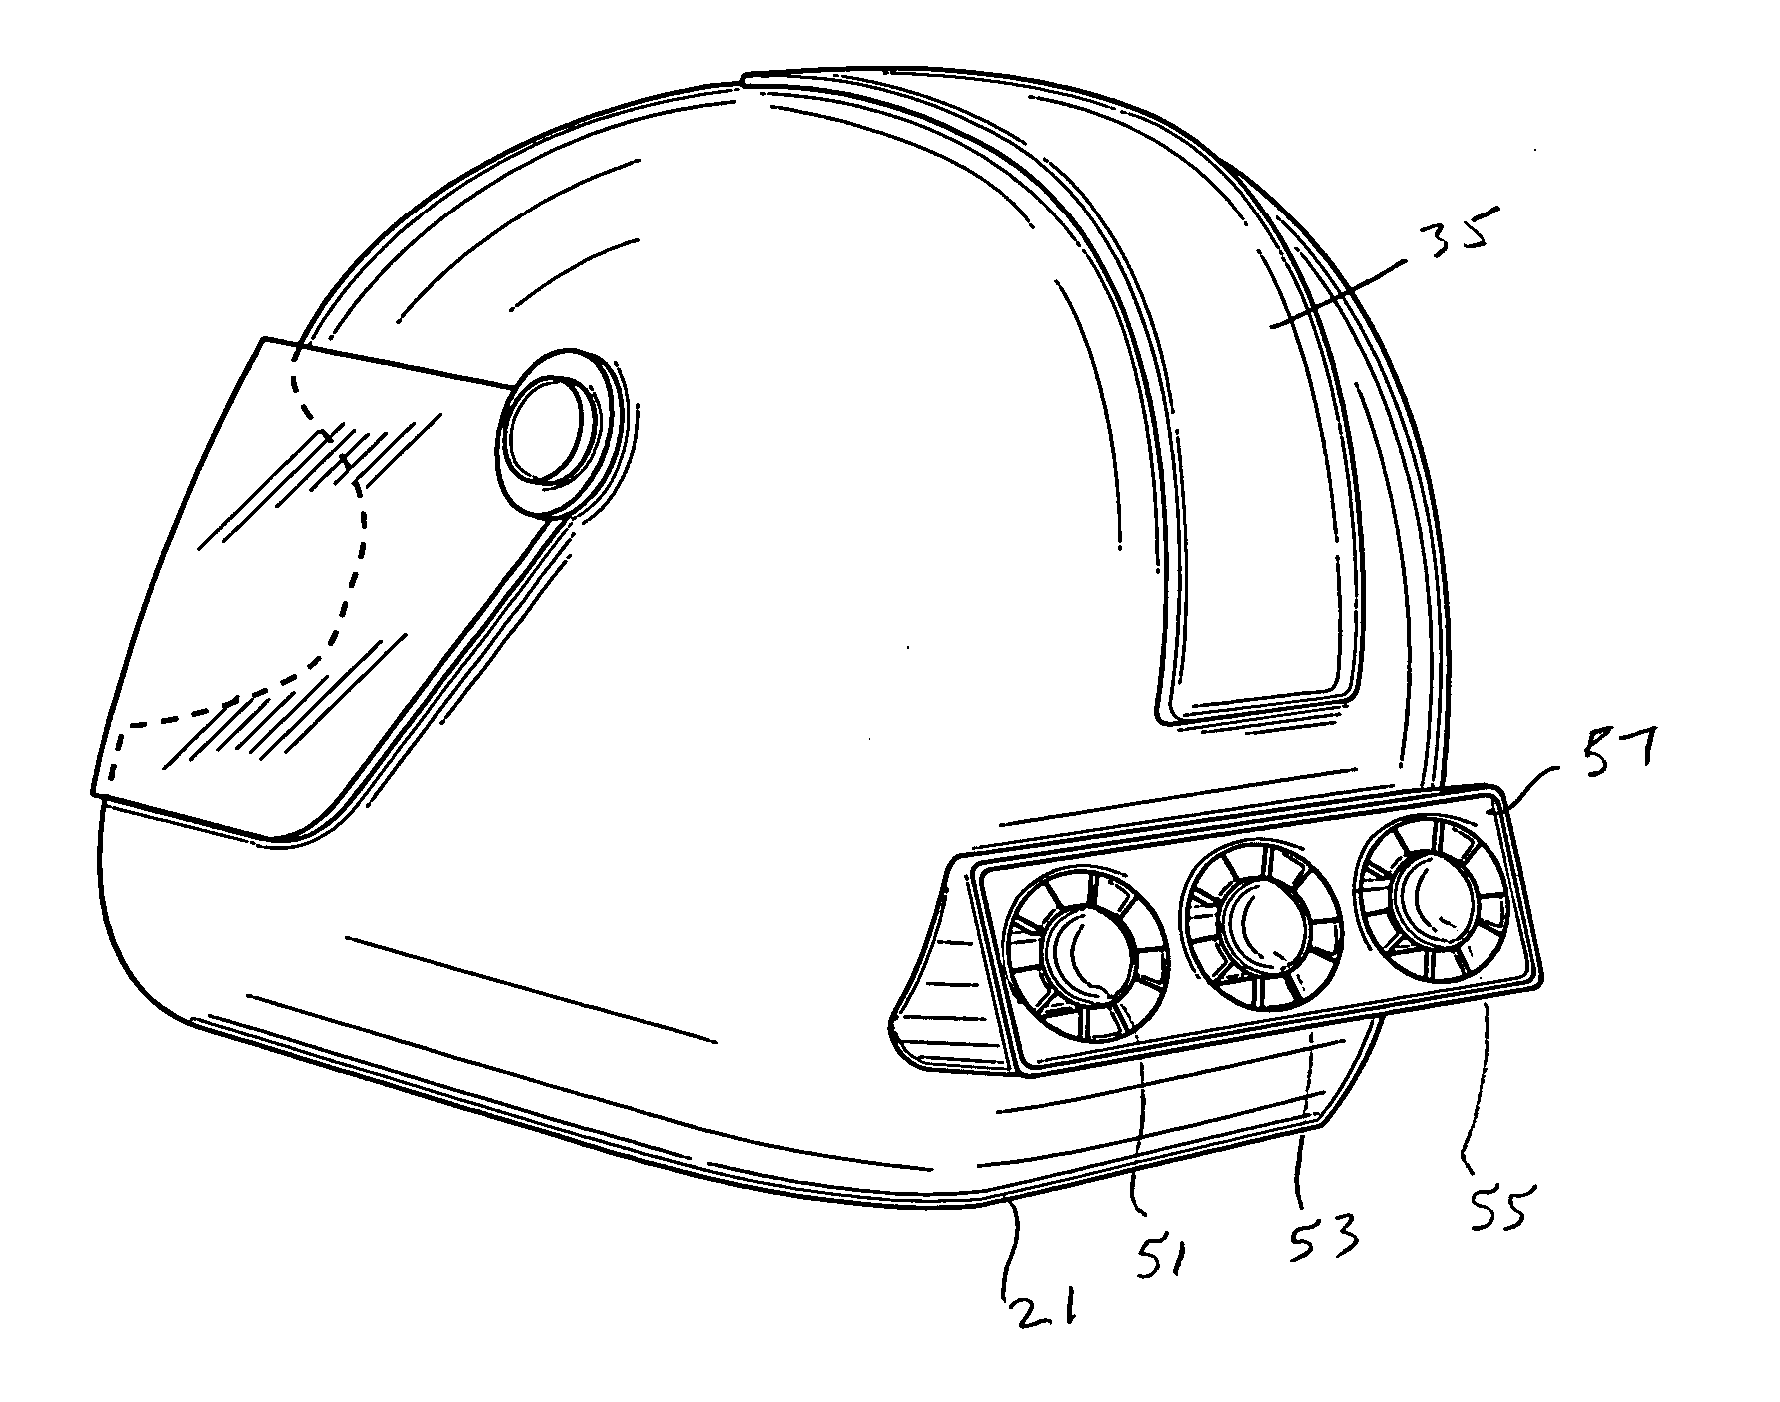 Crash helmet with thermoelectric cooling